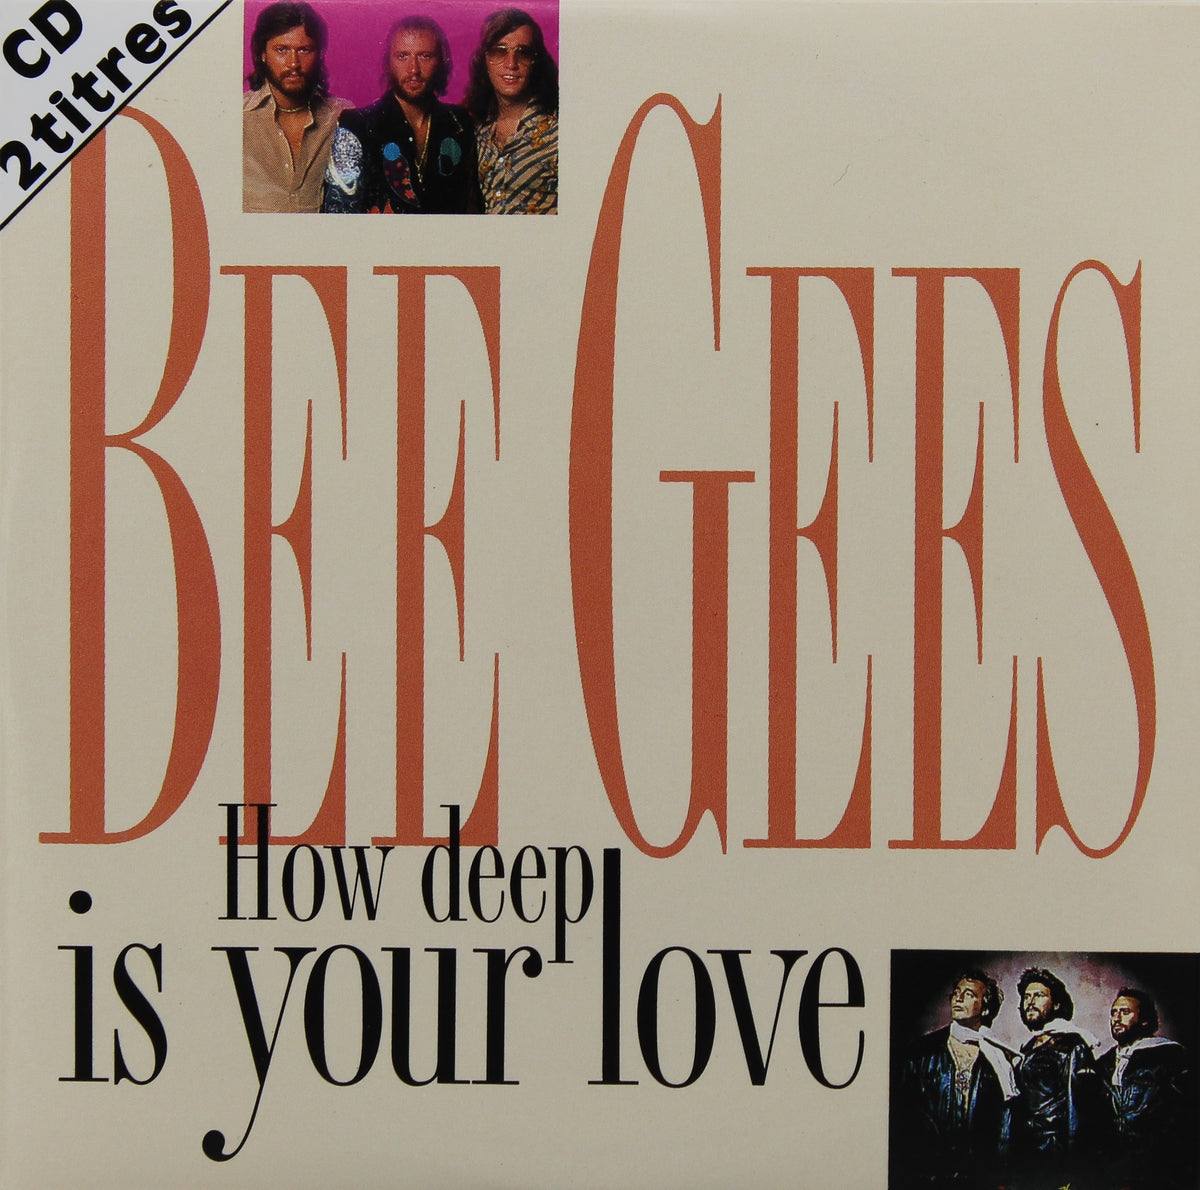 Bee Gees - How Deep Is Your Love, CD, Single, Promo, France 1992